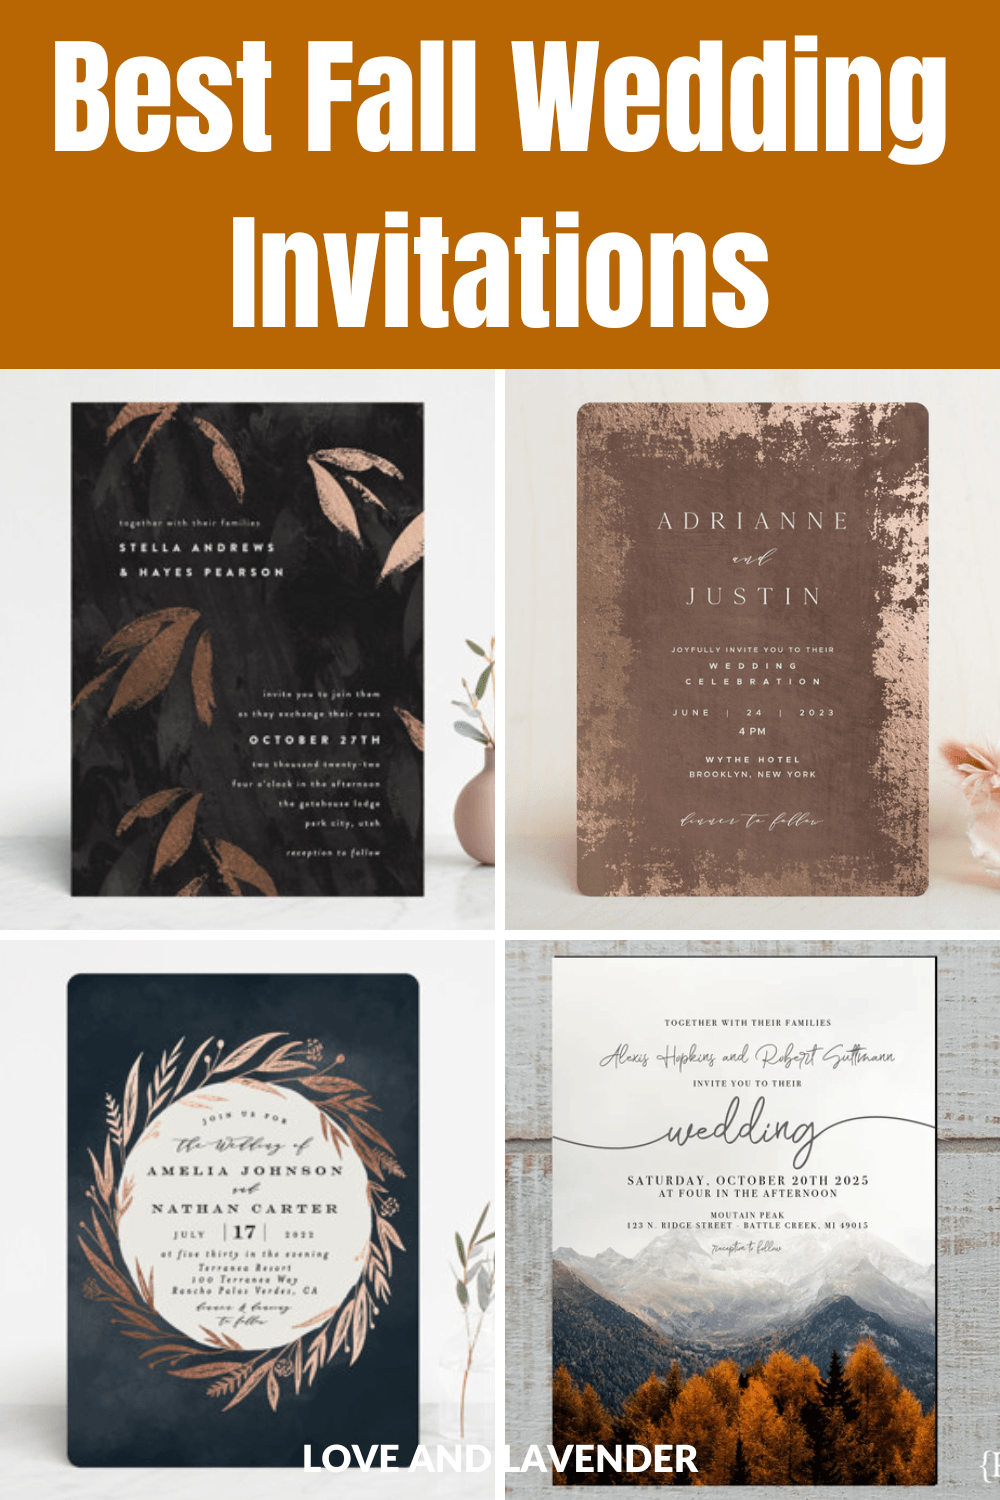 15 Cozy Fall Wedding Invitations For  Every Style